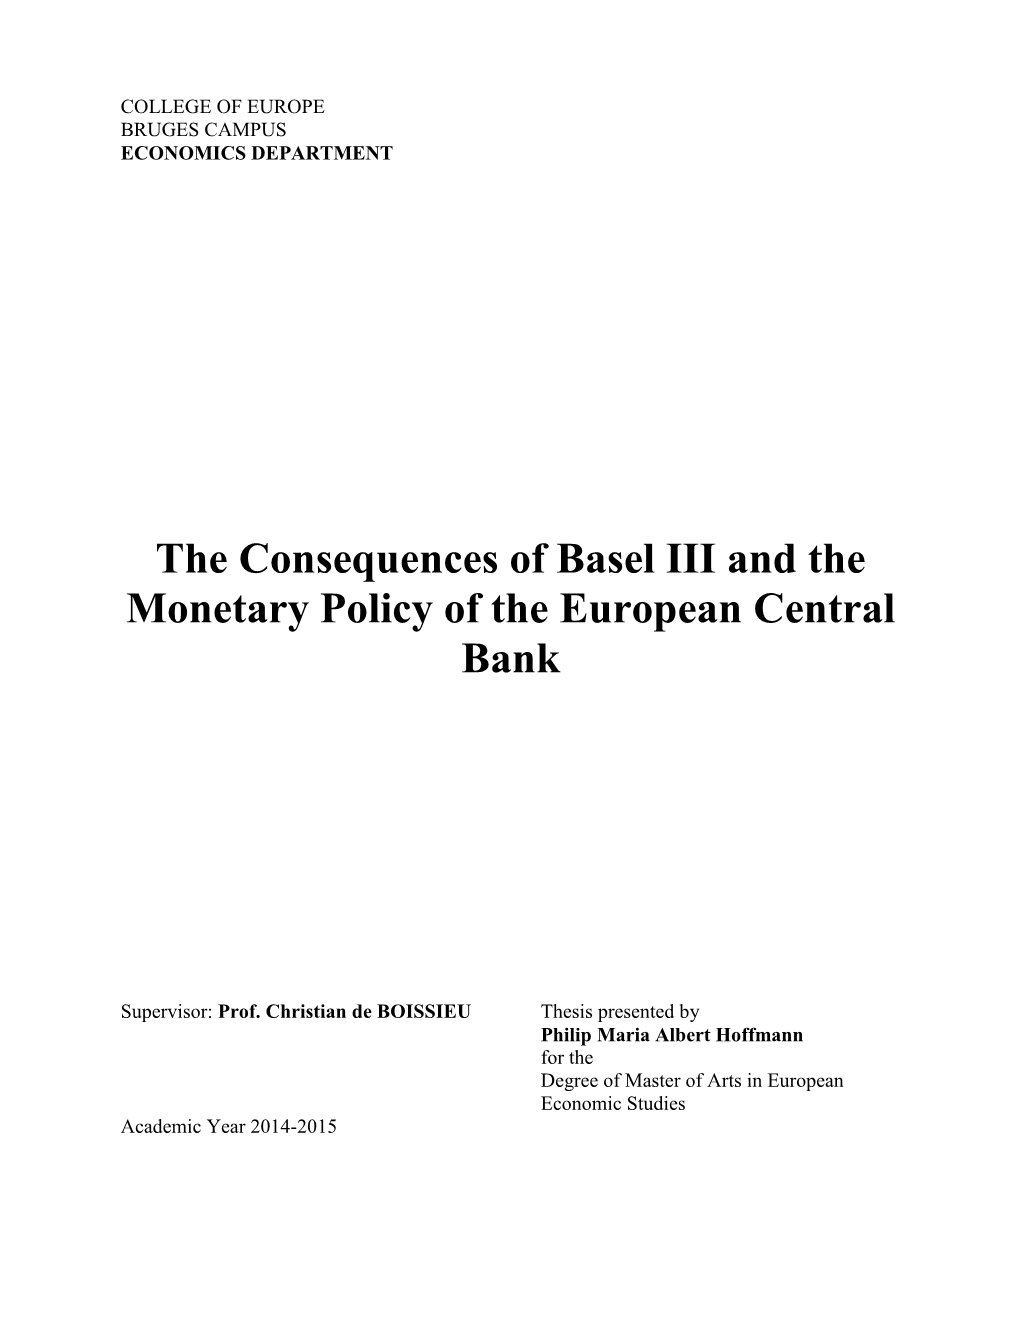 The Consequences of Basel III and the Monetary Policy of the European Central Bank